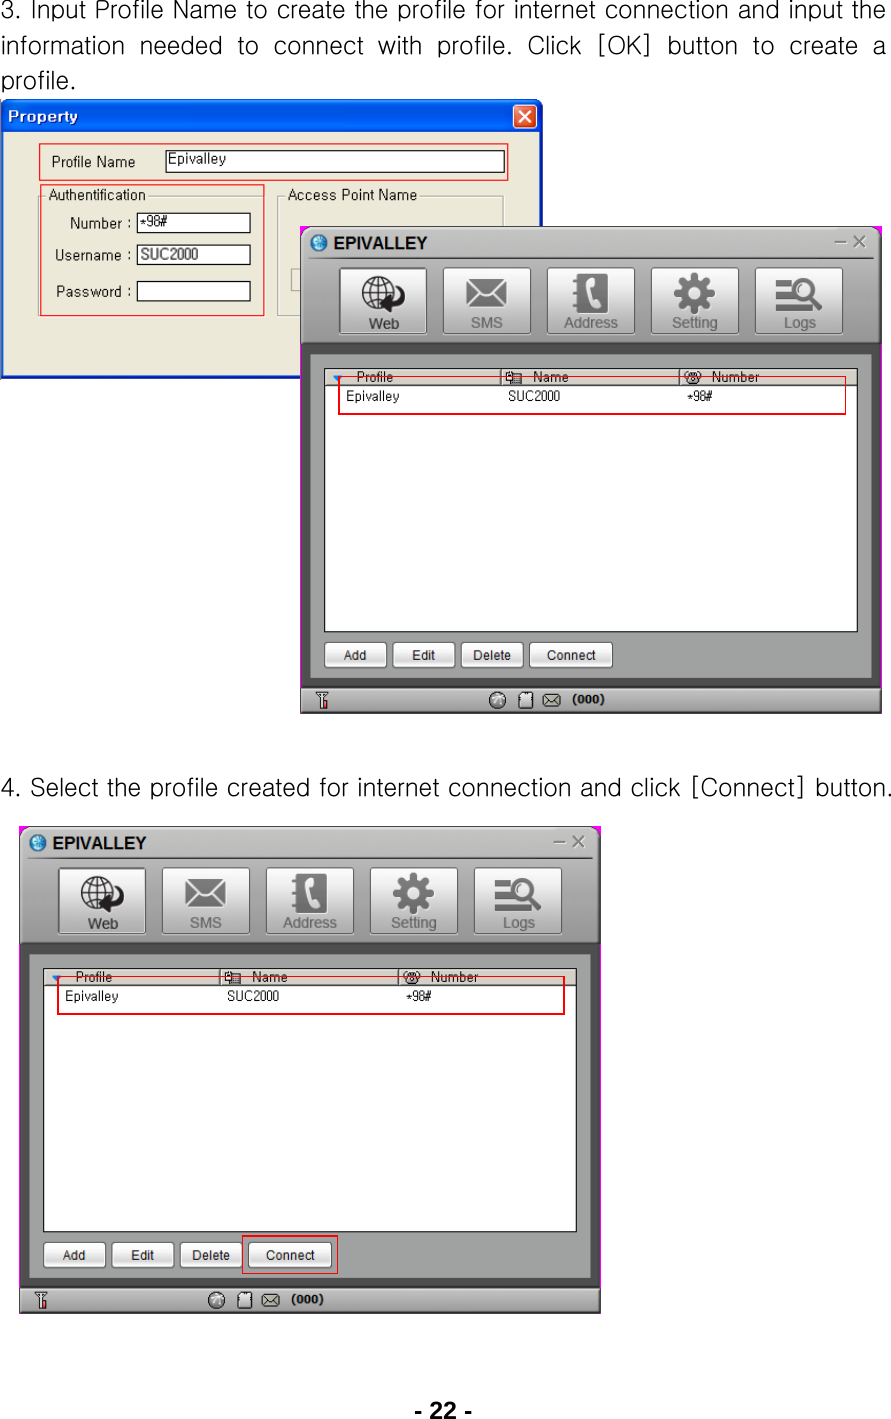 - 22 - 3. Input Profile Name to create the profile for internet connection and input the information needed to connect with profile. Click [OK] button to  create  a profile.                      4. Select the profile created for internet connection and click [Connect] button.                 